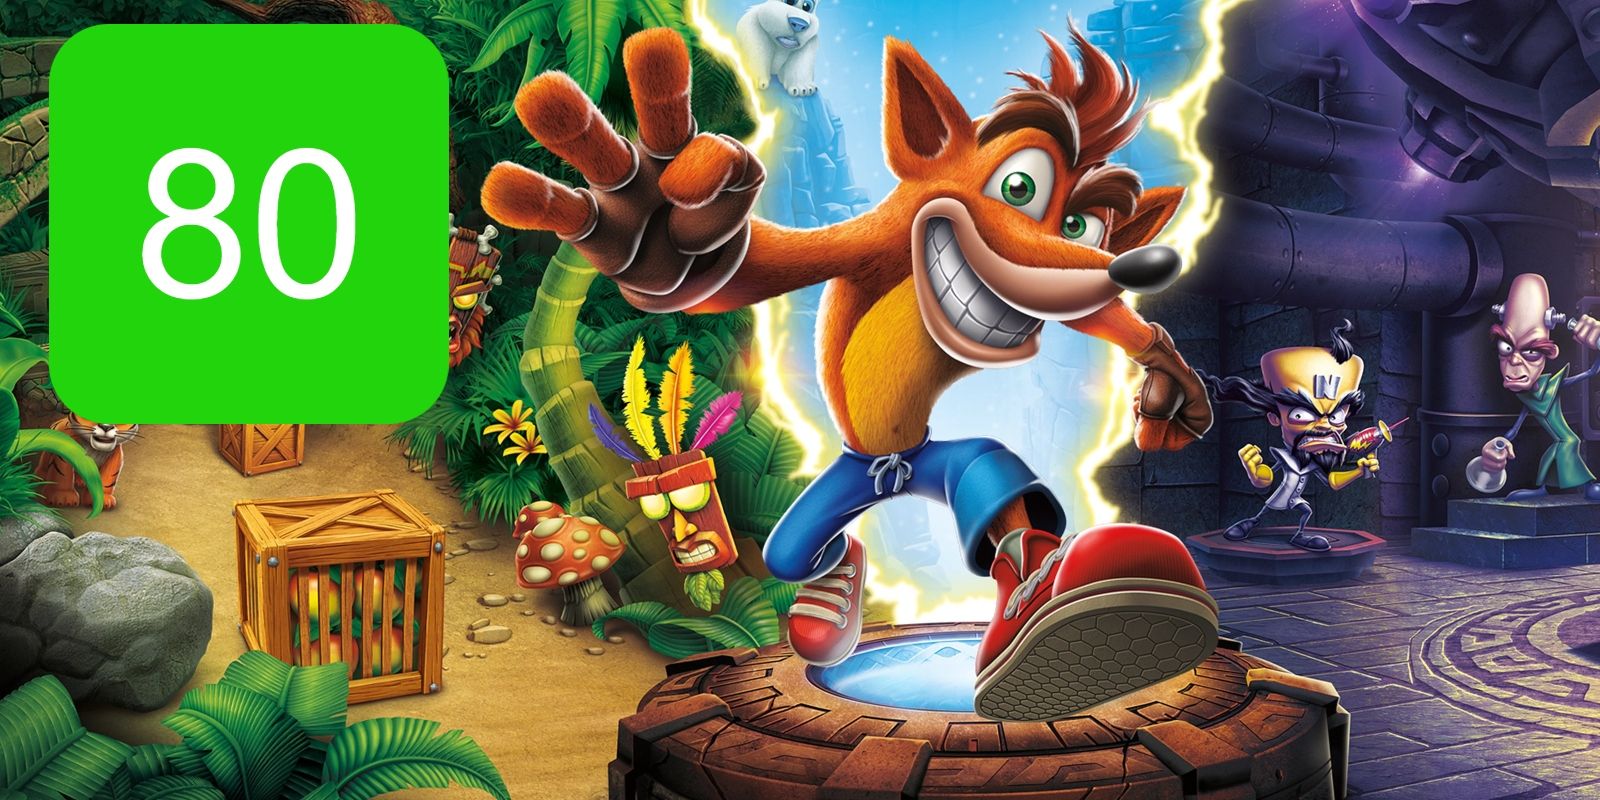 A visual of crash bandicoot with its metascore